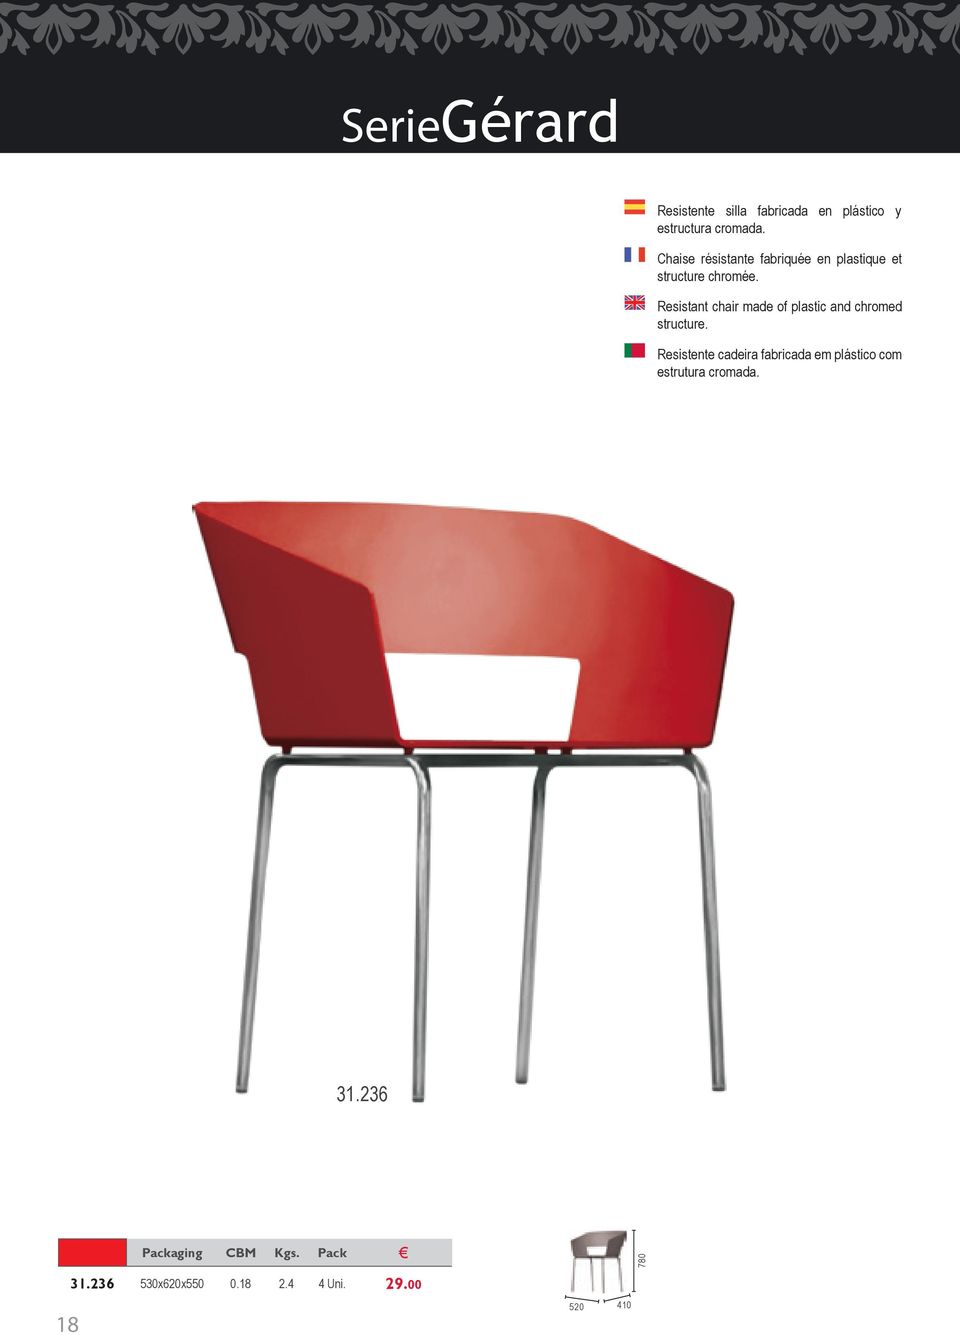 Resistant chair made of plastic and chromed structure.